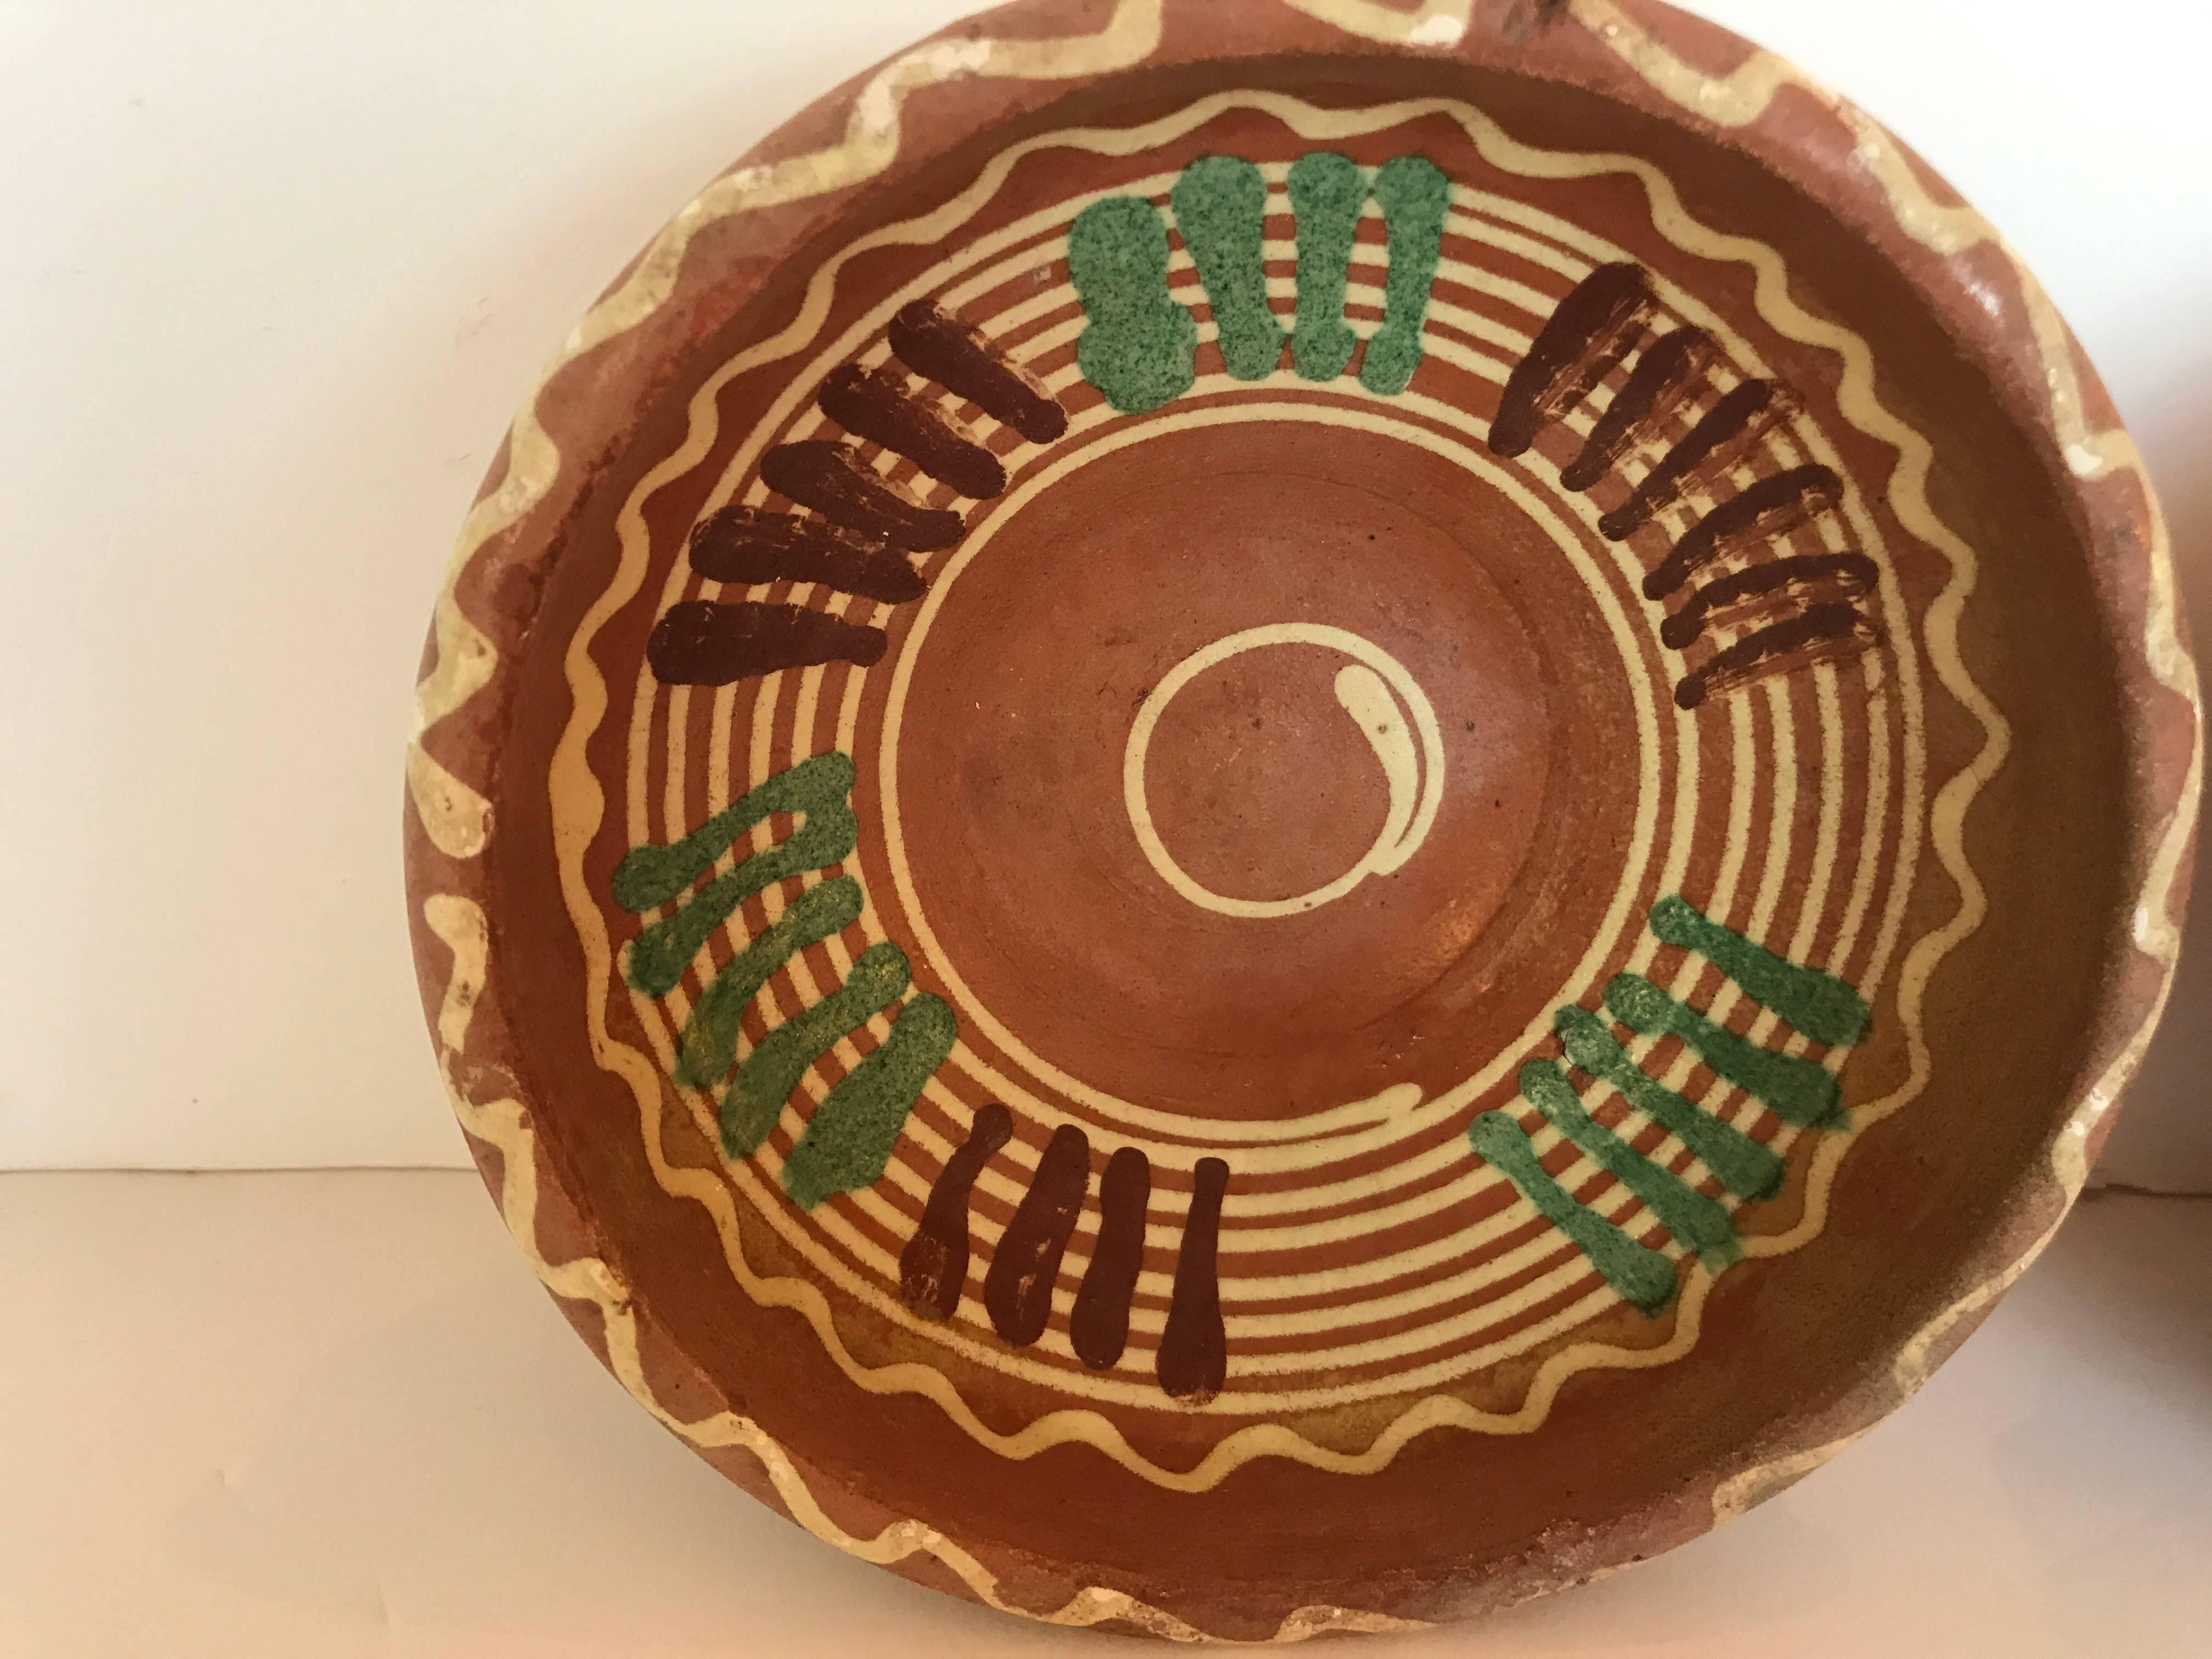 Transylvania vintage pottery from Romania. Hand-painted Folk Art designs on redware pottery.